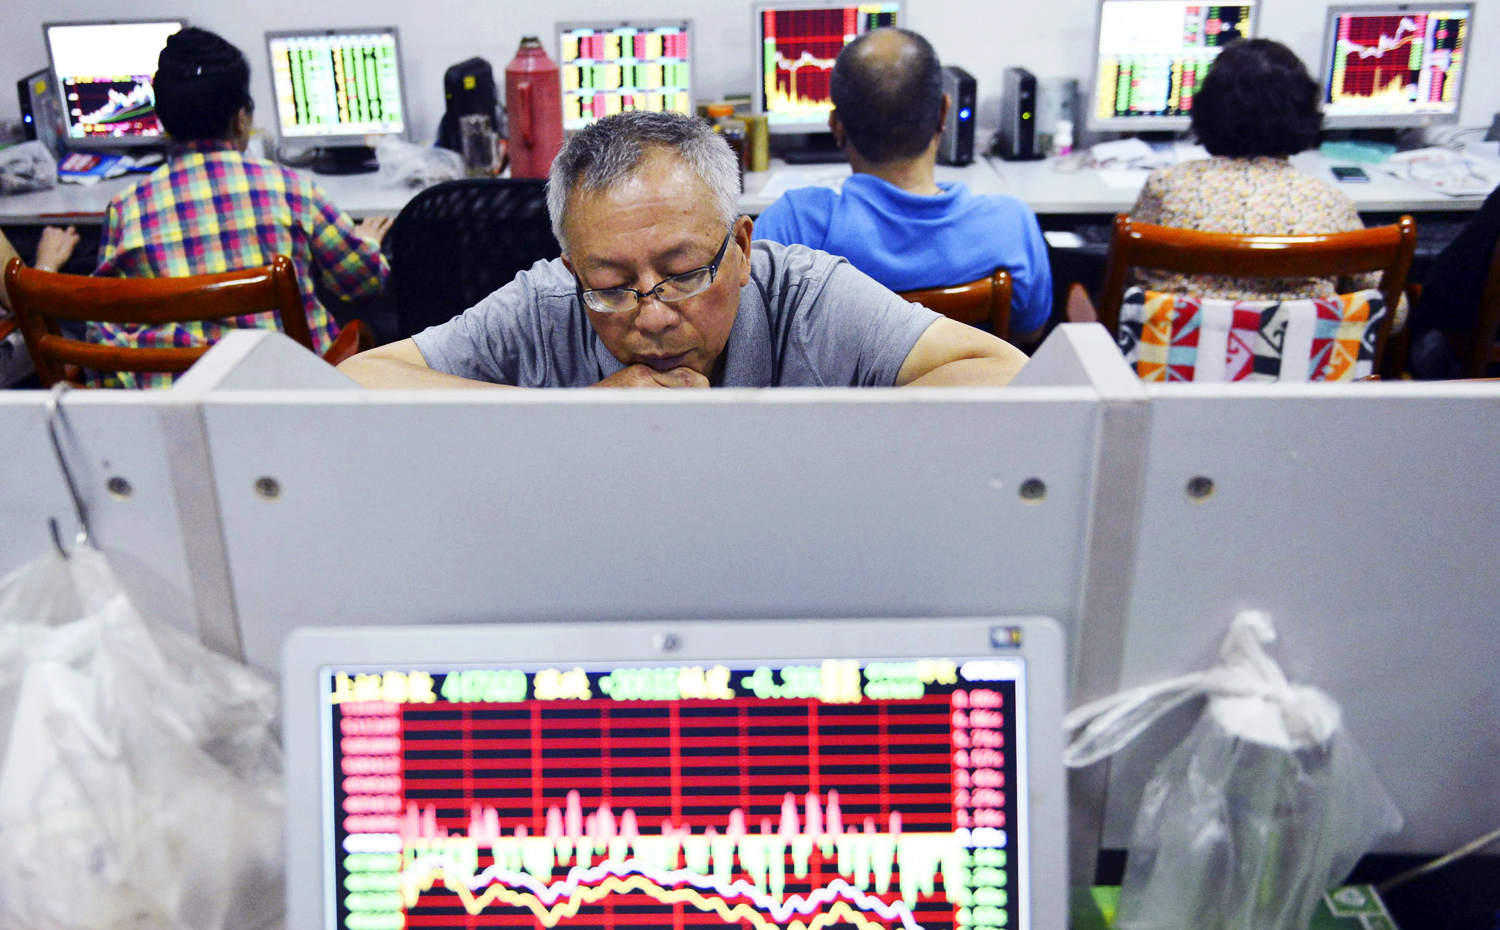 Chinese investors pore over stock prices on Monday after a rout on Friday sent indexes skidding. Photo: AP